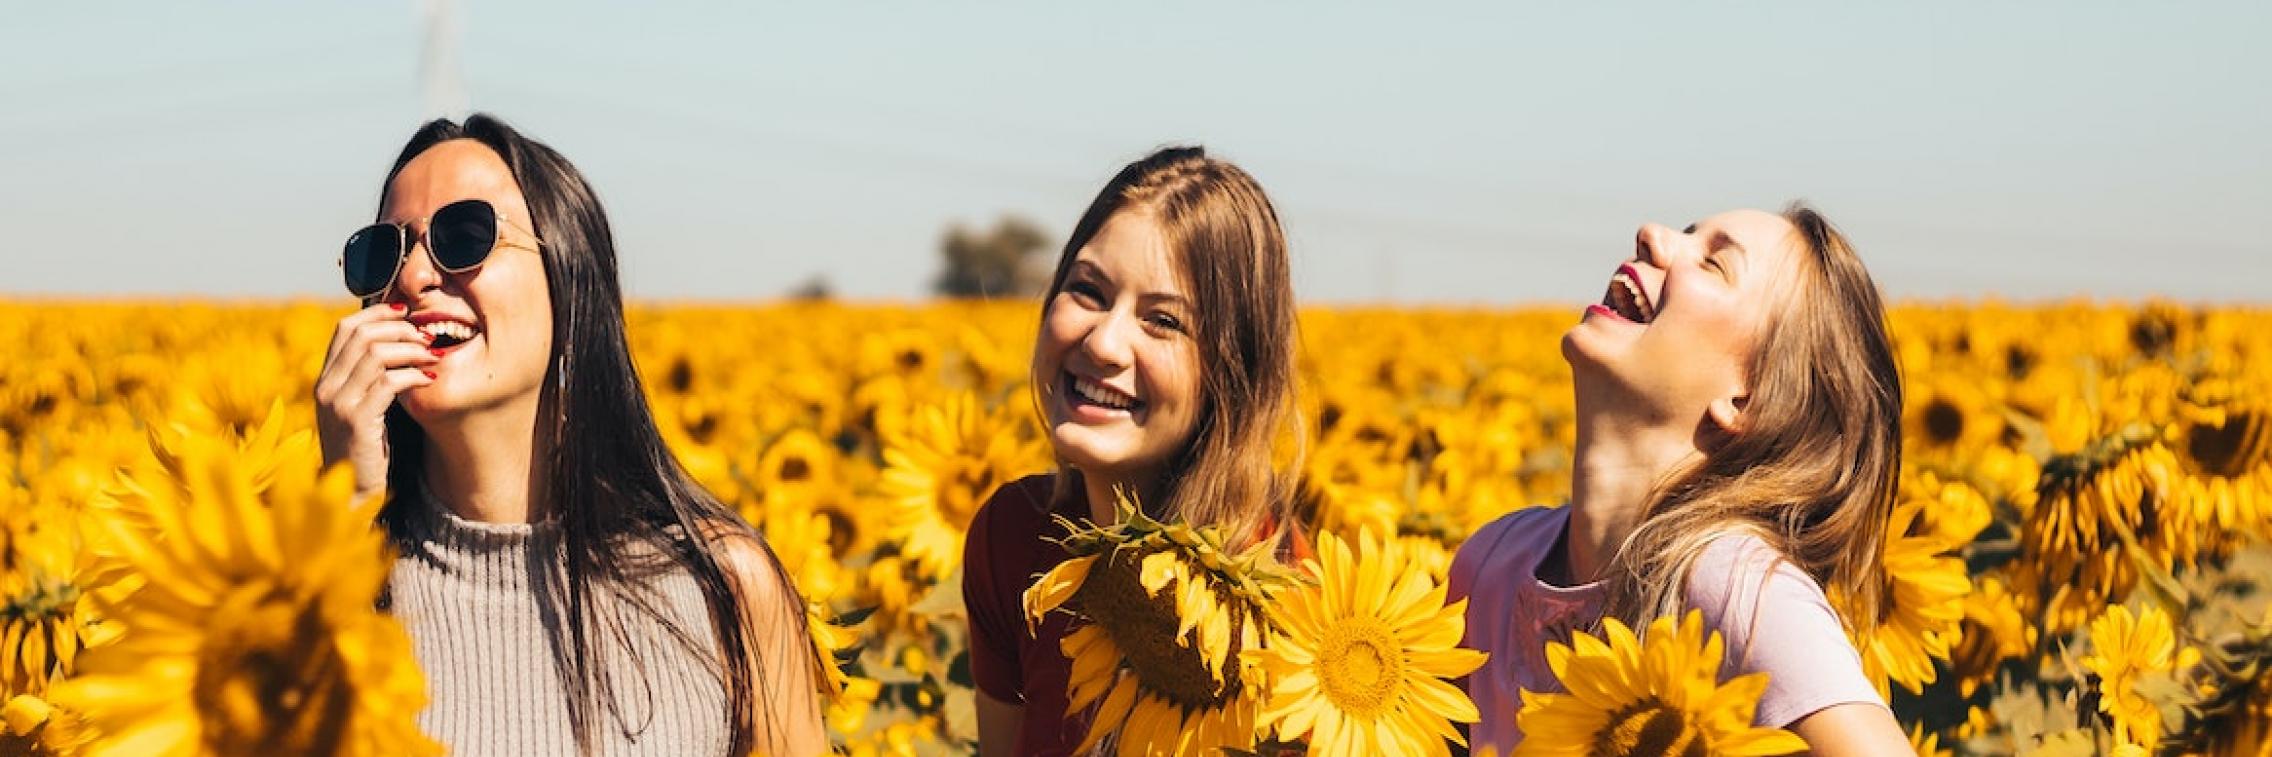 Three women laughing in a sunflower field.